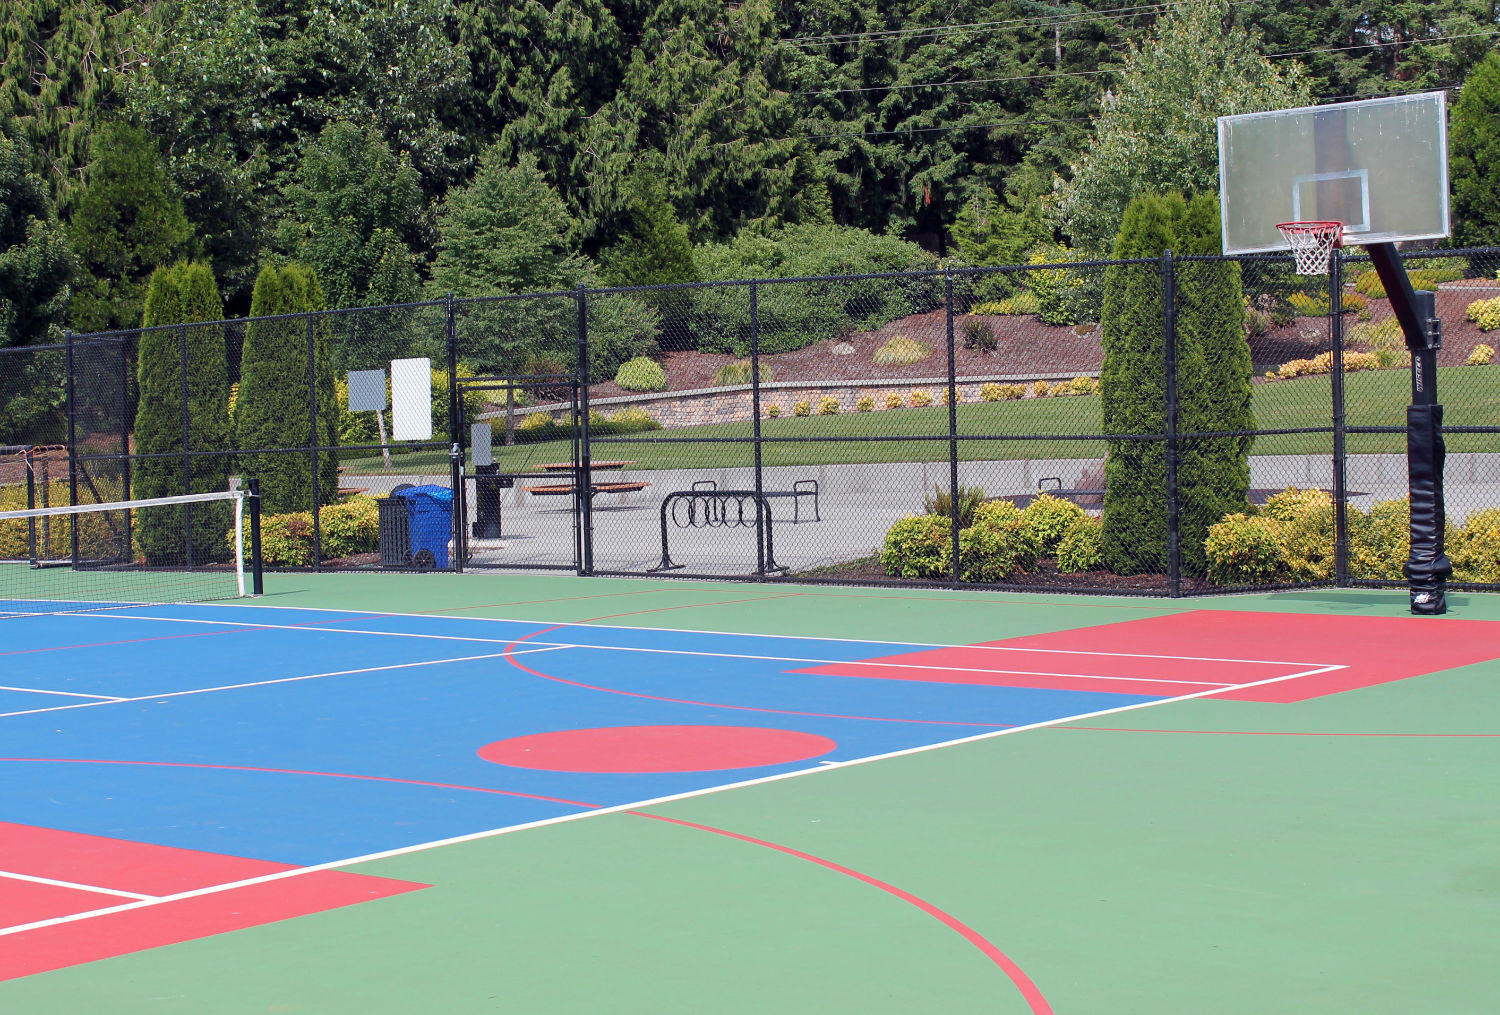 ebright creek park blended tennis / basketball court with picnic area behind